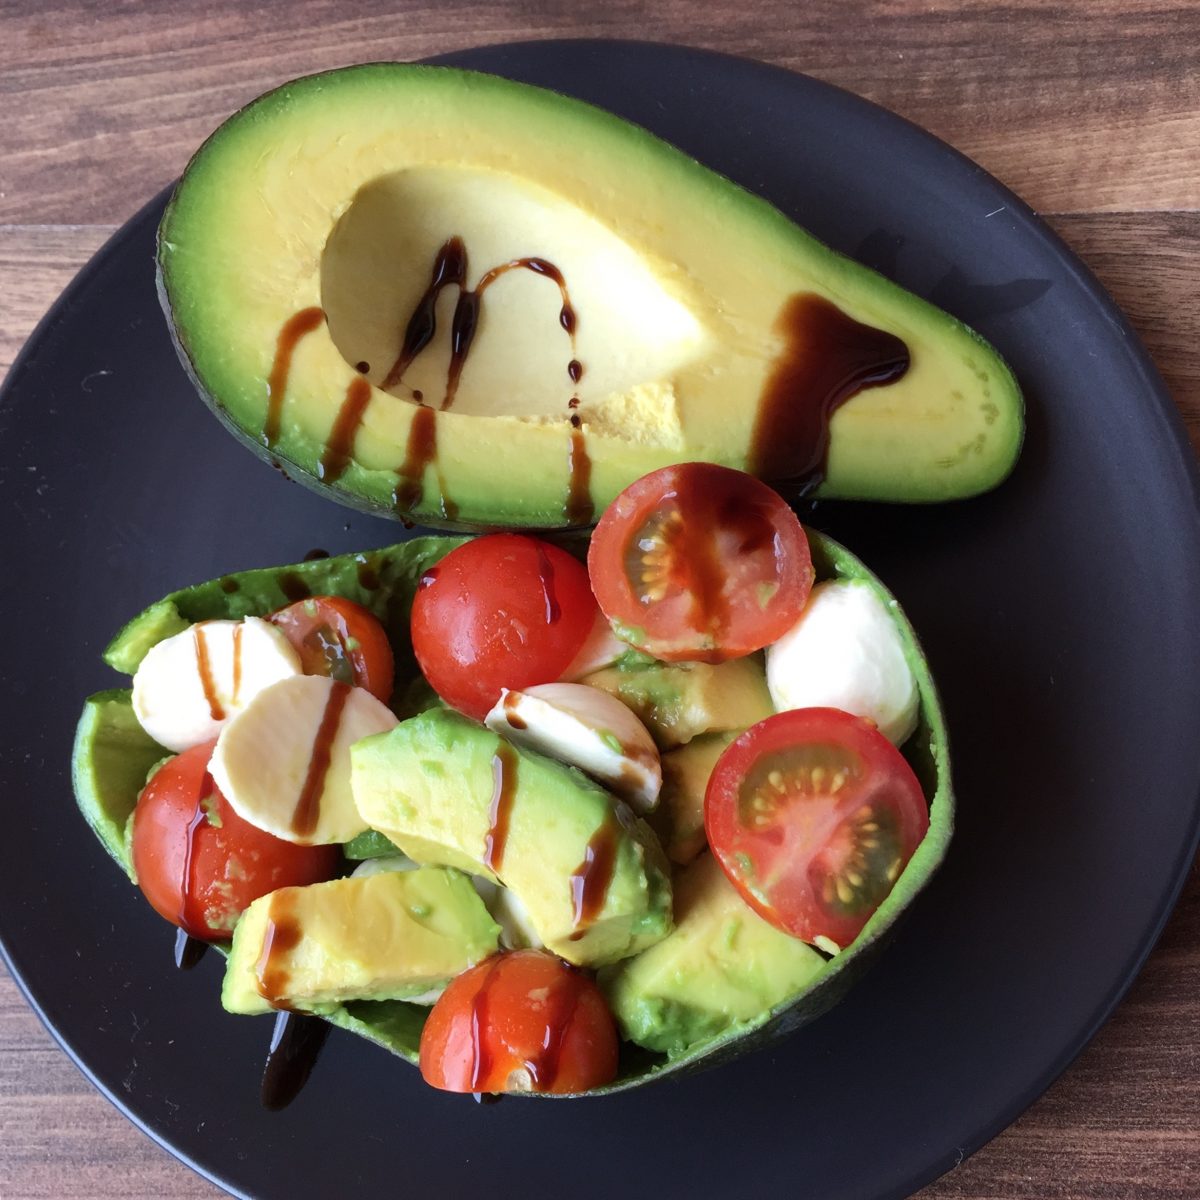 Avocado Caprese Salad by cooking meals for one